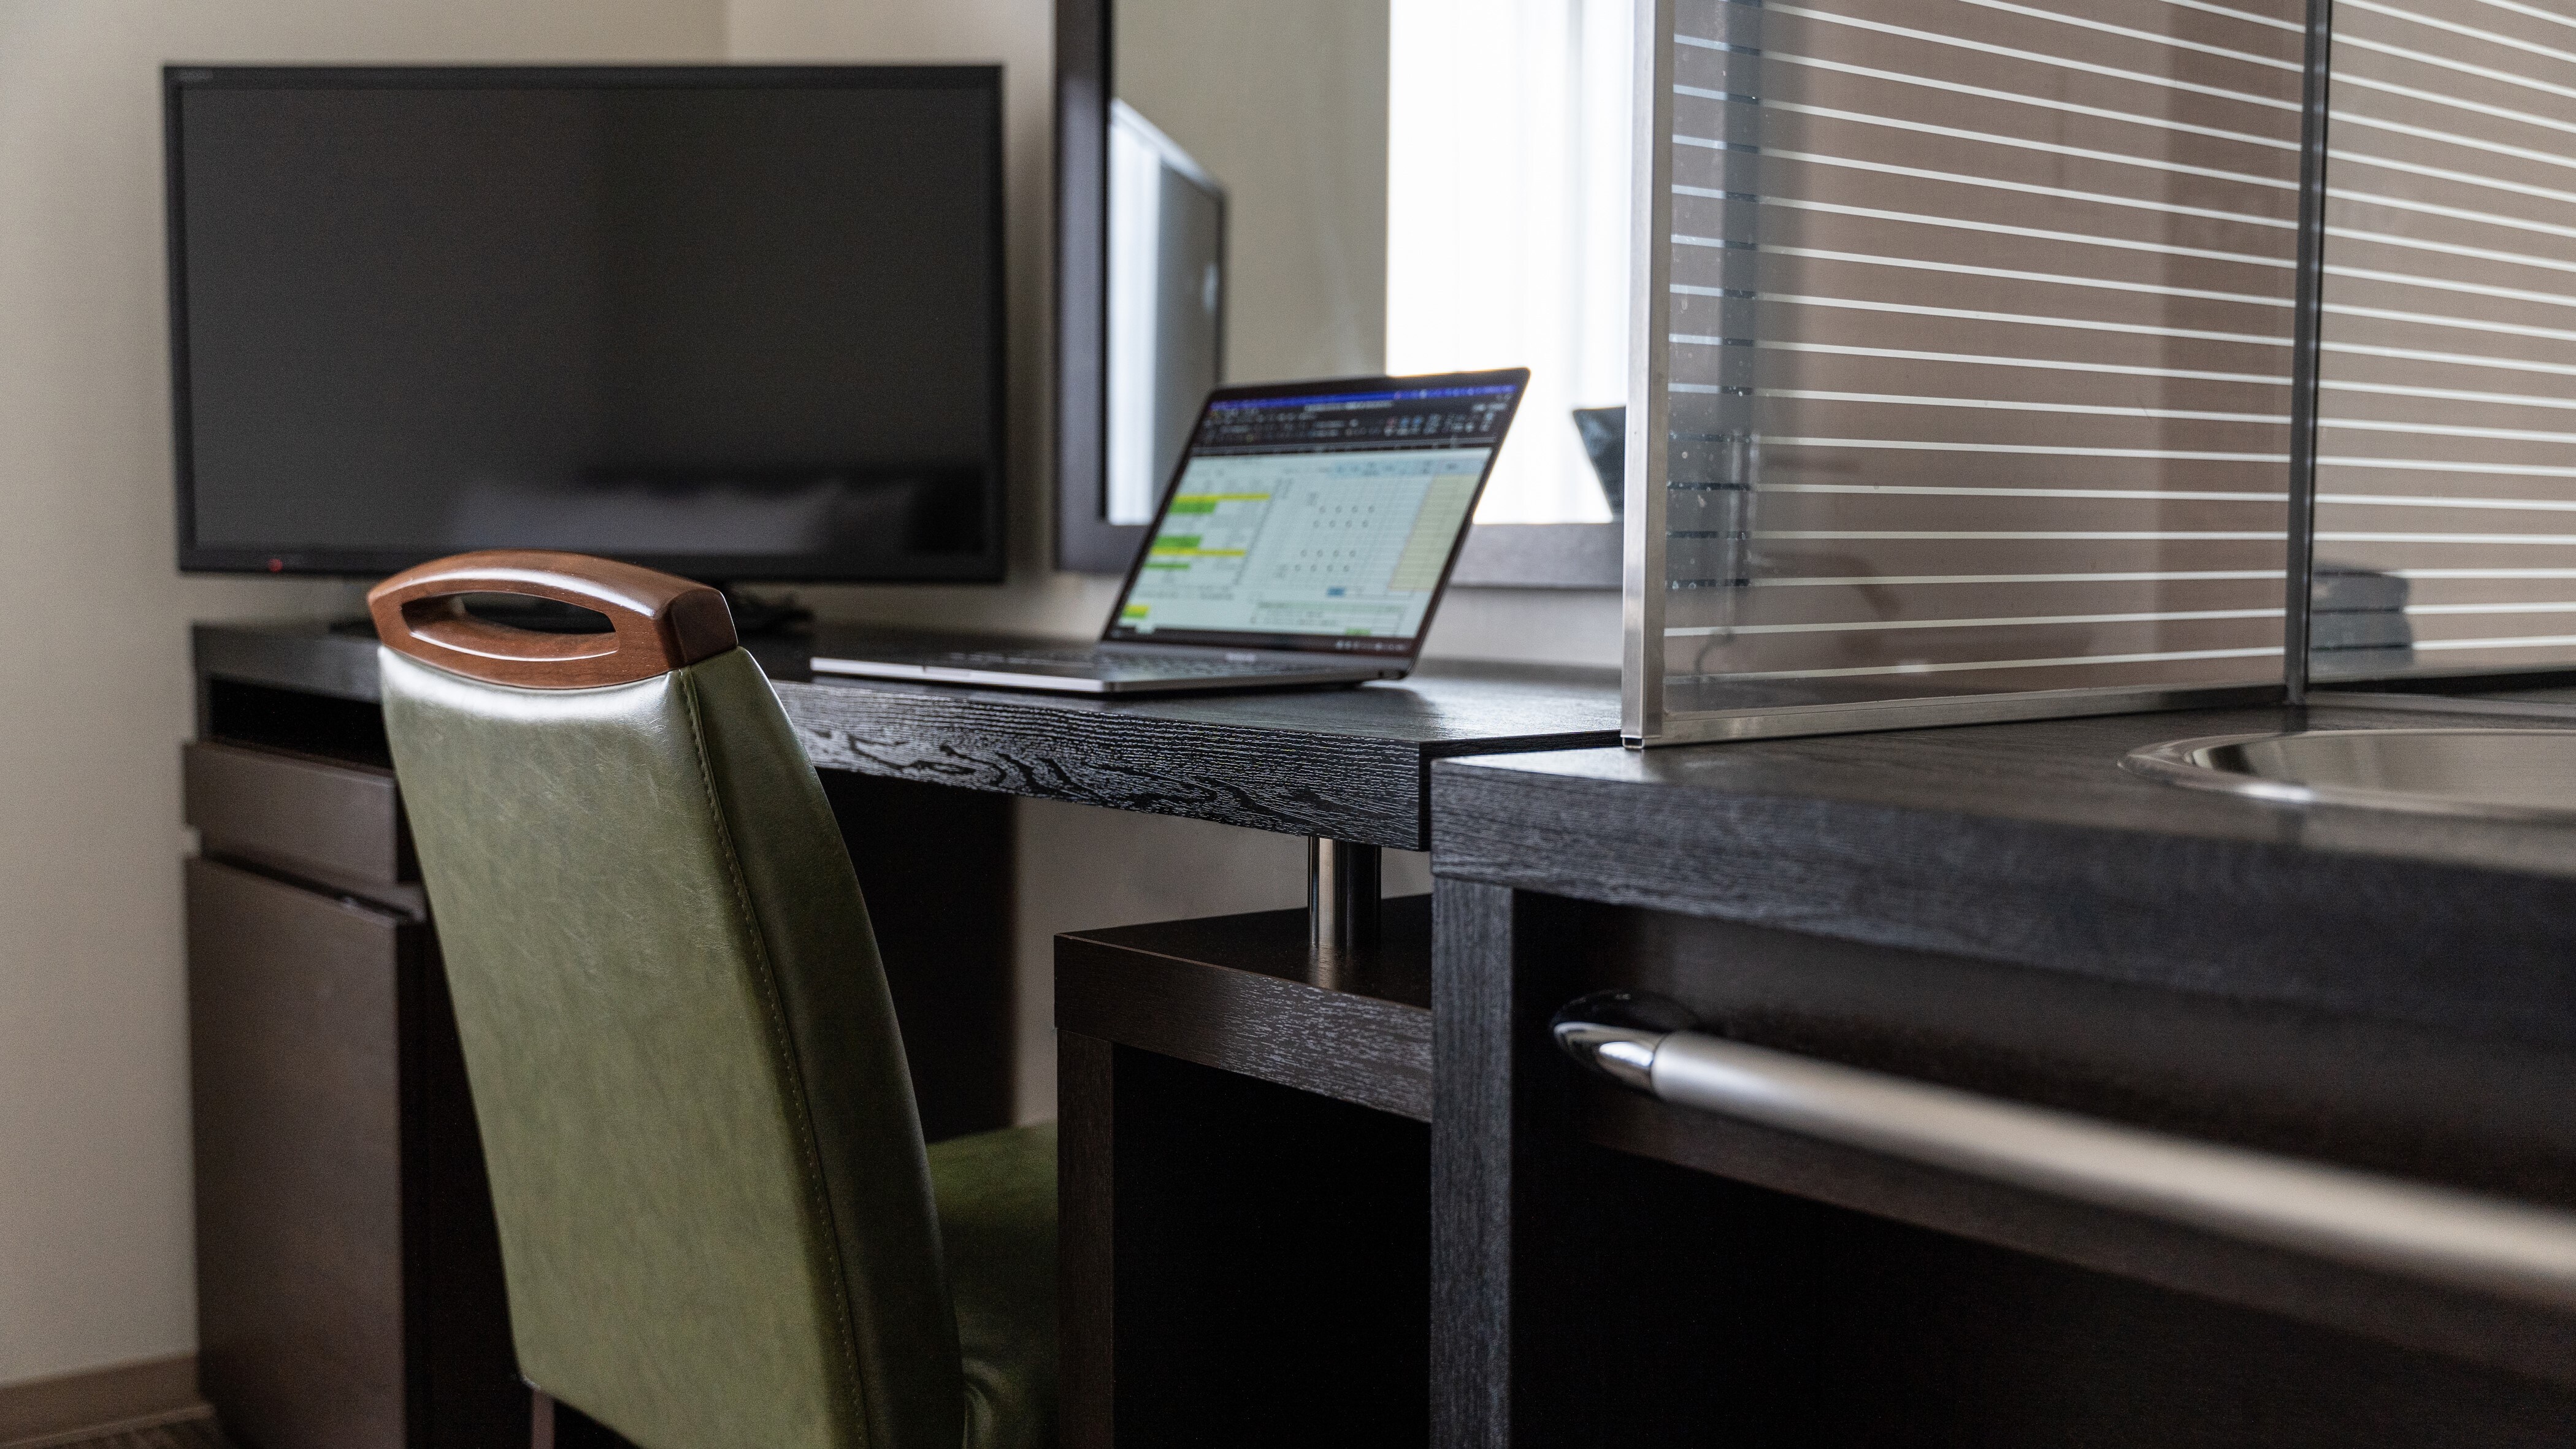 The wide writing desk allows you to spread out your documents and work. There is also an outlet at the desk, so it is safe